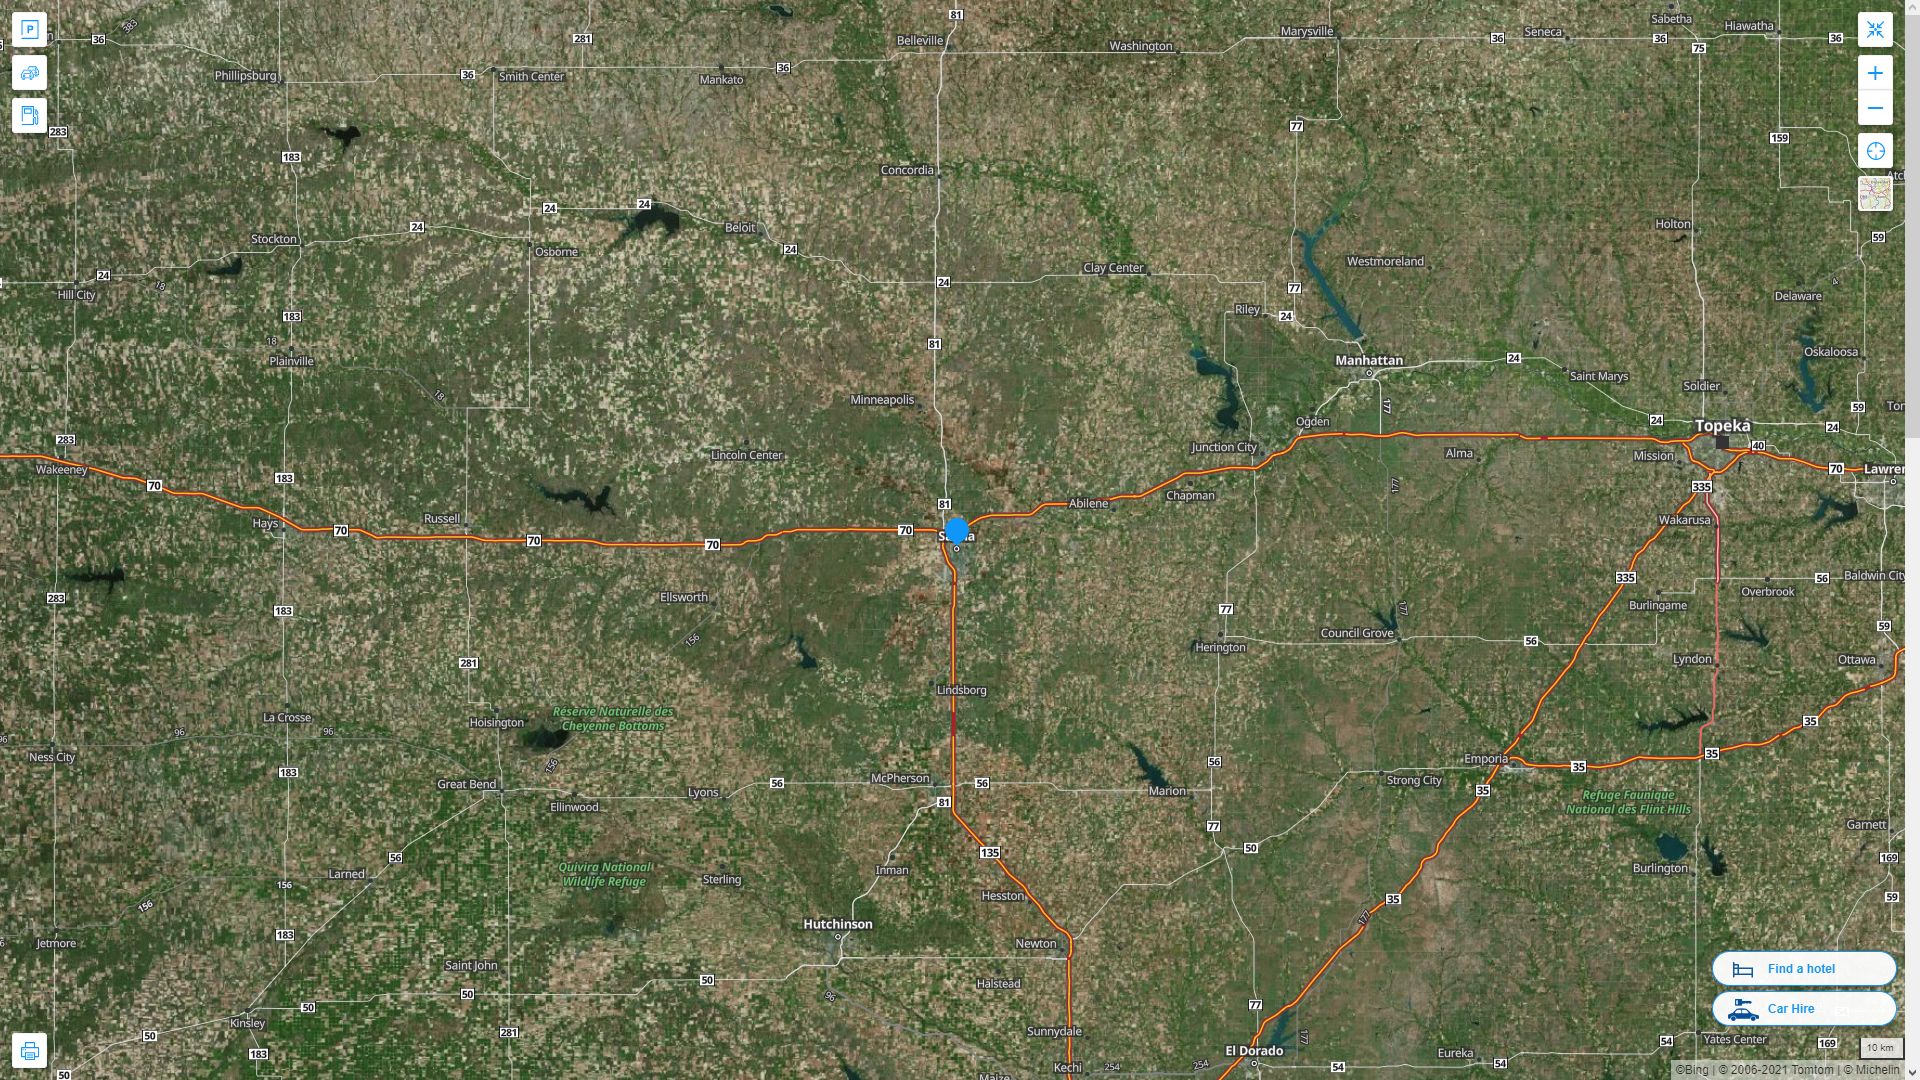 Salina Kansas Highway and Road Map with Satellite View